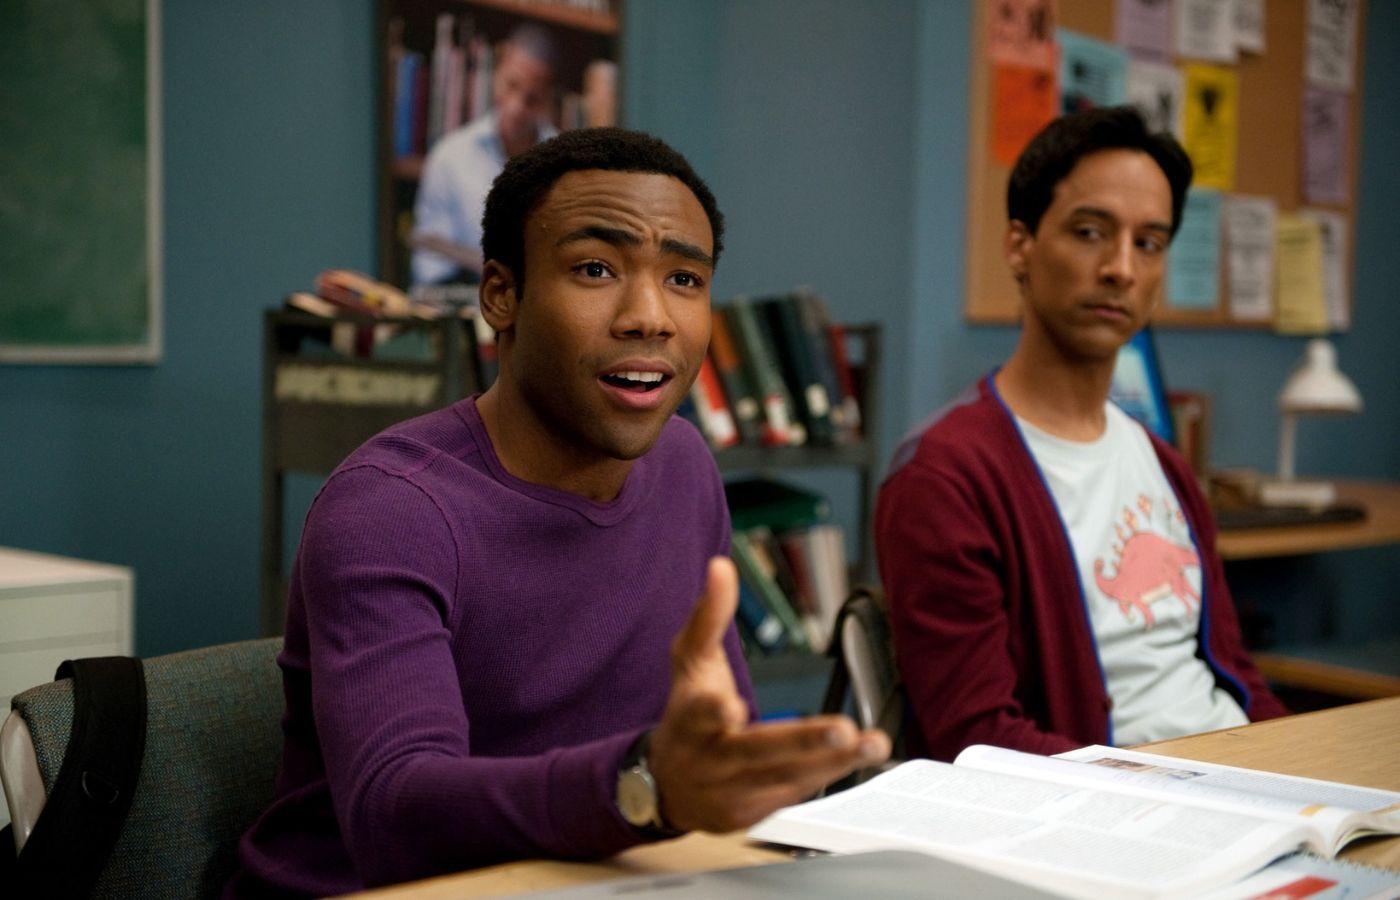 Some of the cast of Community - will they be in the movie?